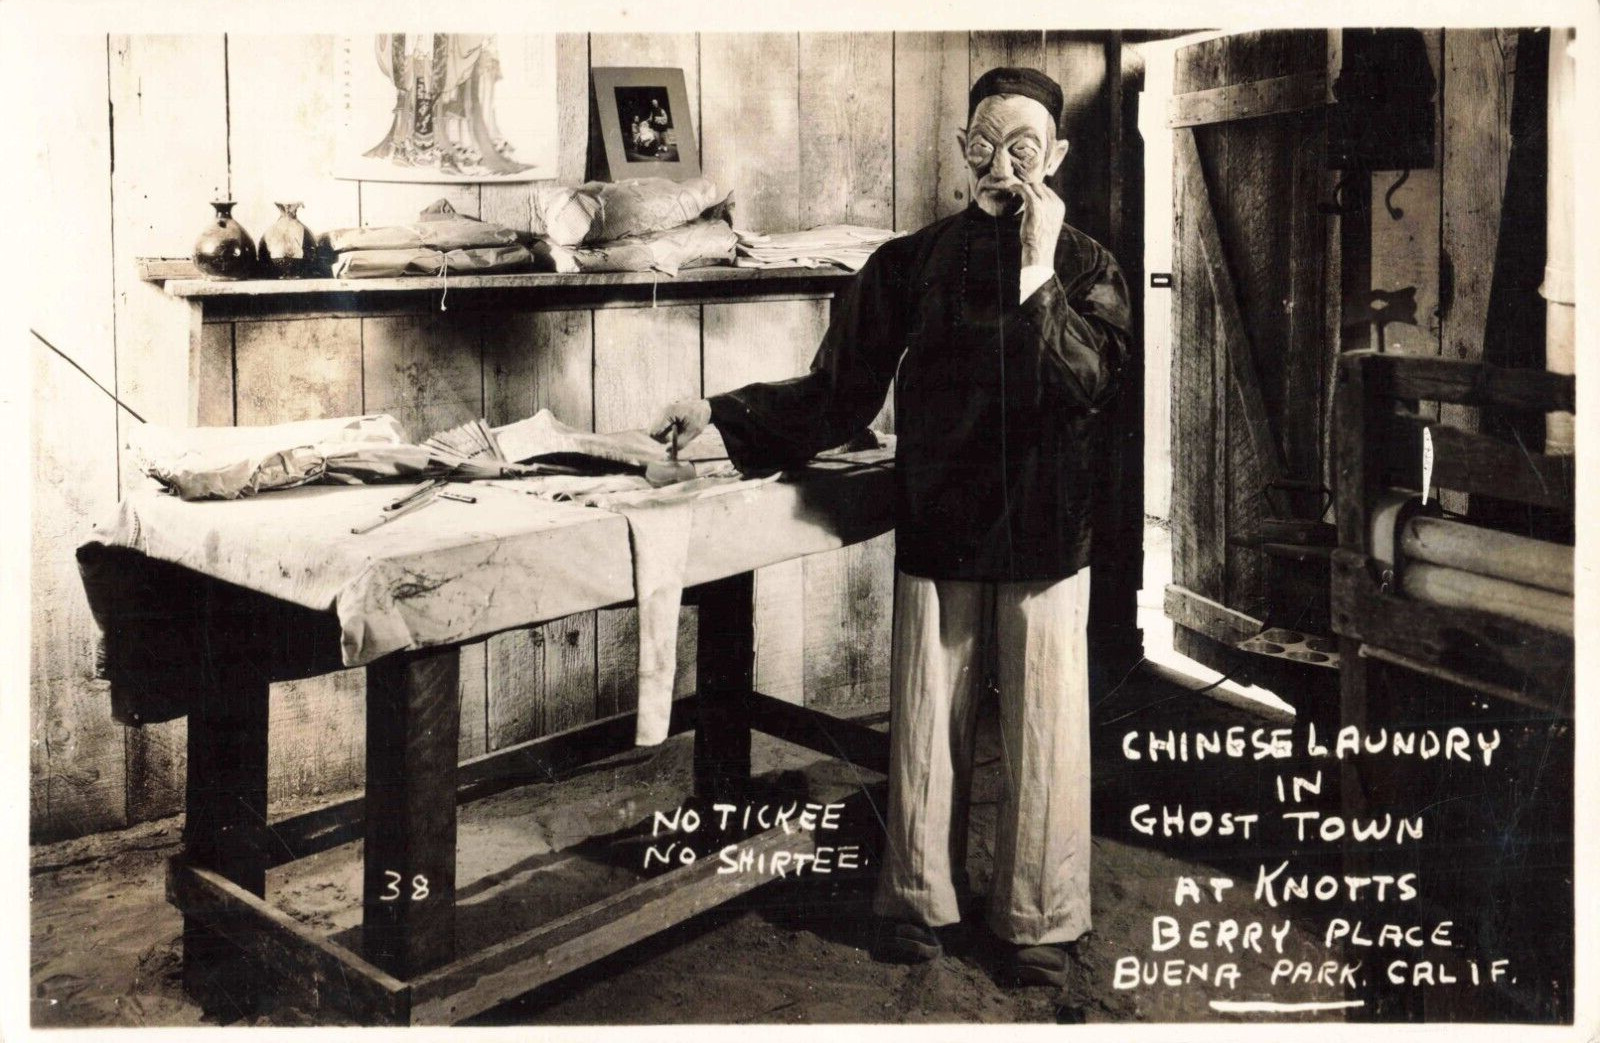 Buena Park CA Knott's Berry Ghost Town Chinese Laundry RPPC Real Photo Postcard